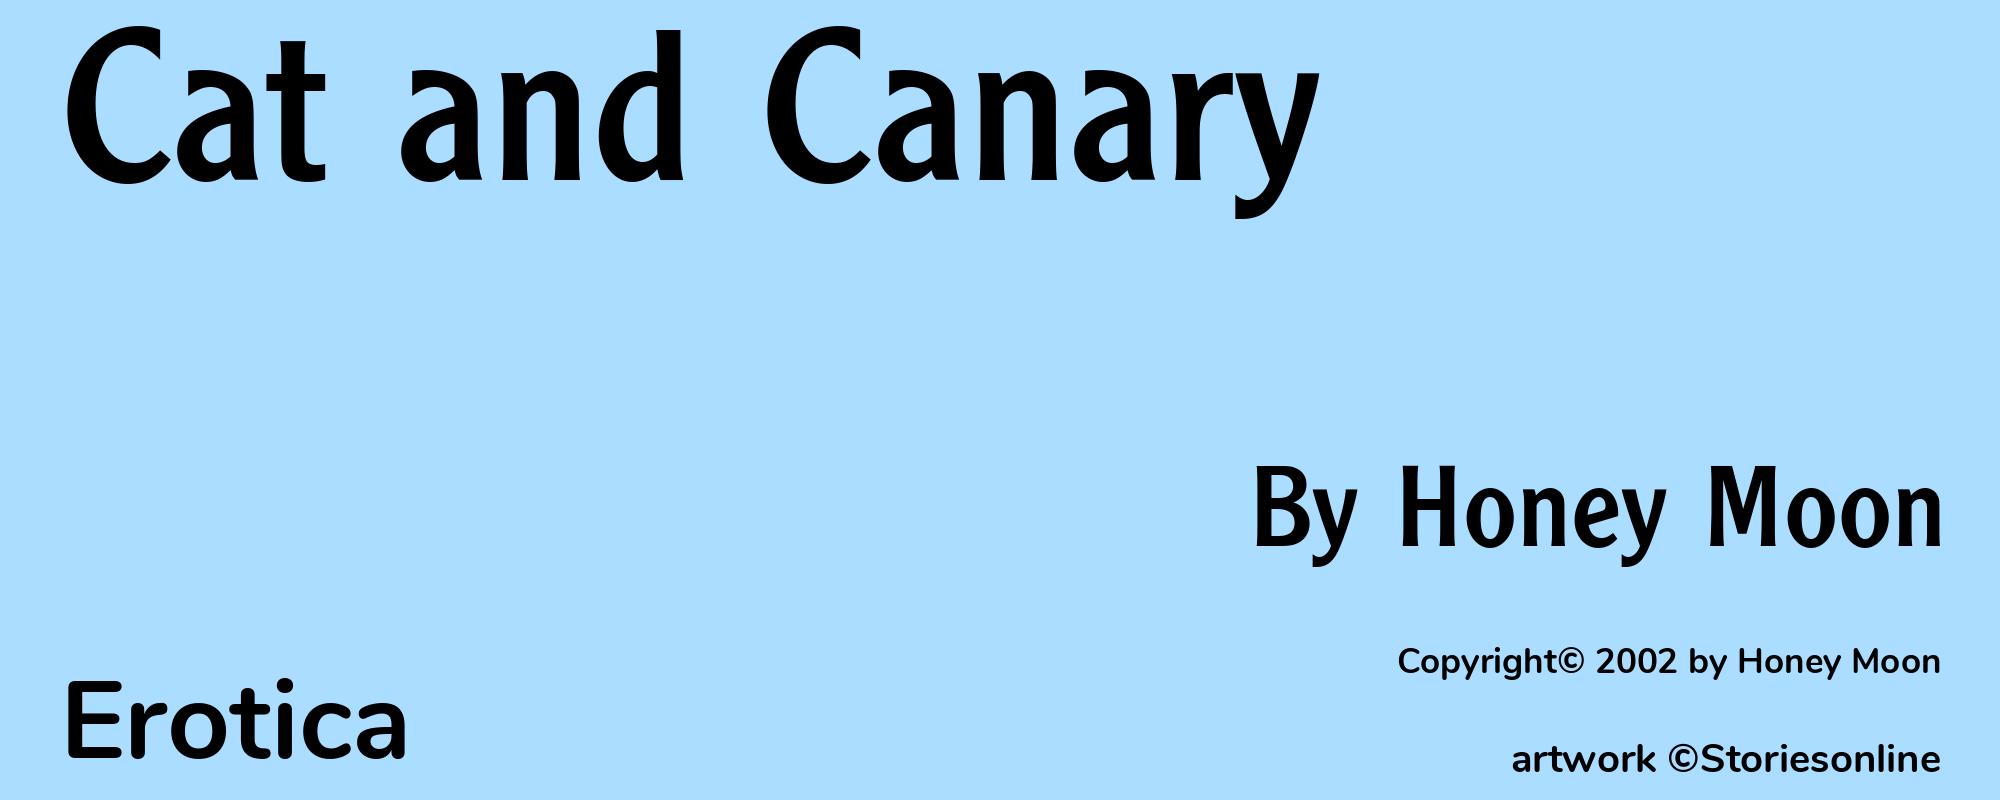 Cat and Canary - Cover